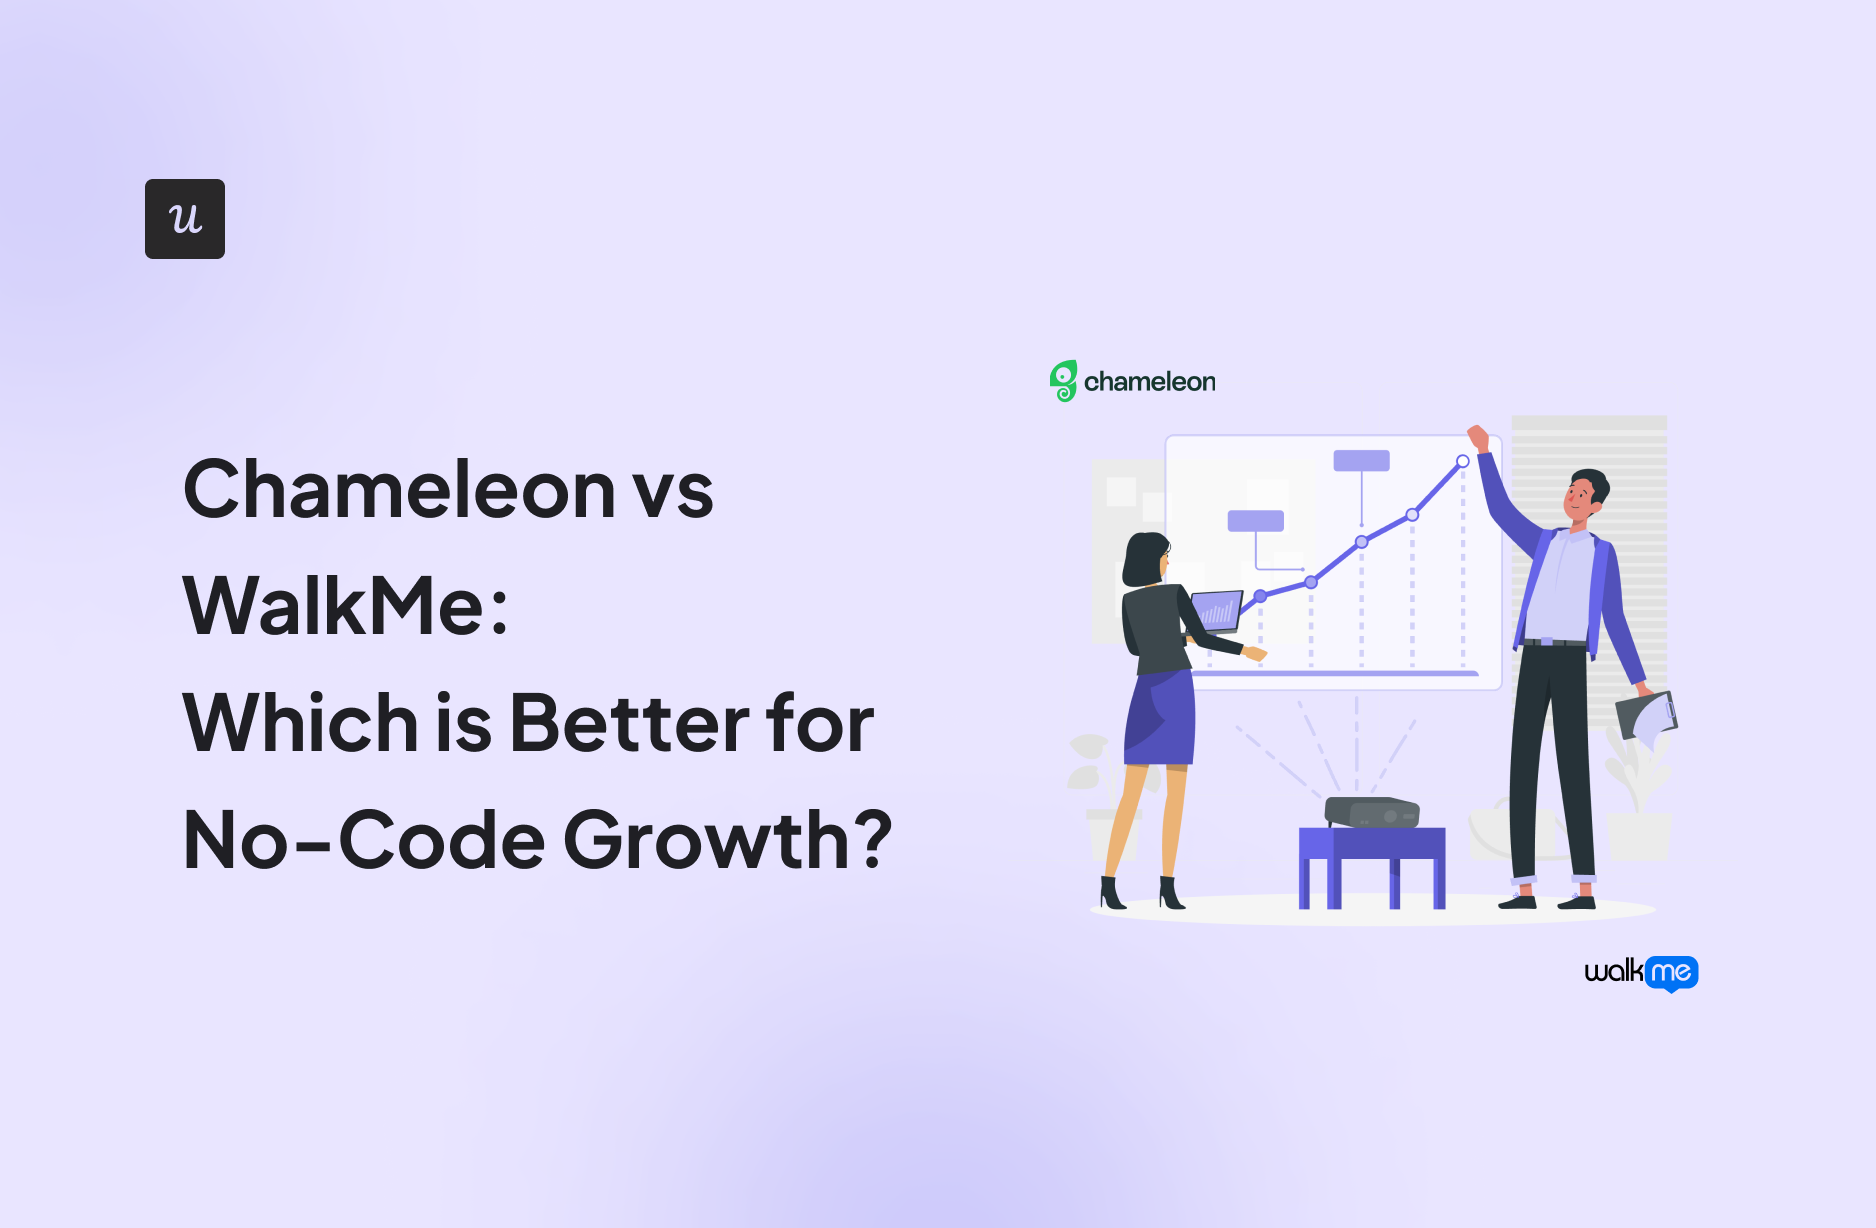 Chameleon vs WalkMe: Which is Better for No-Code Growth?